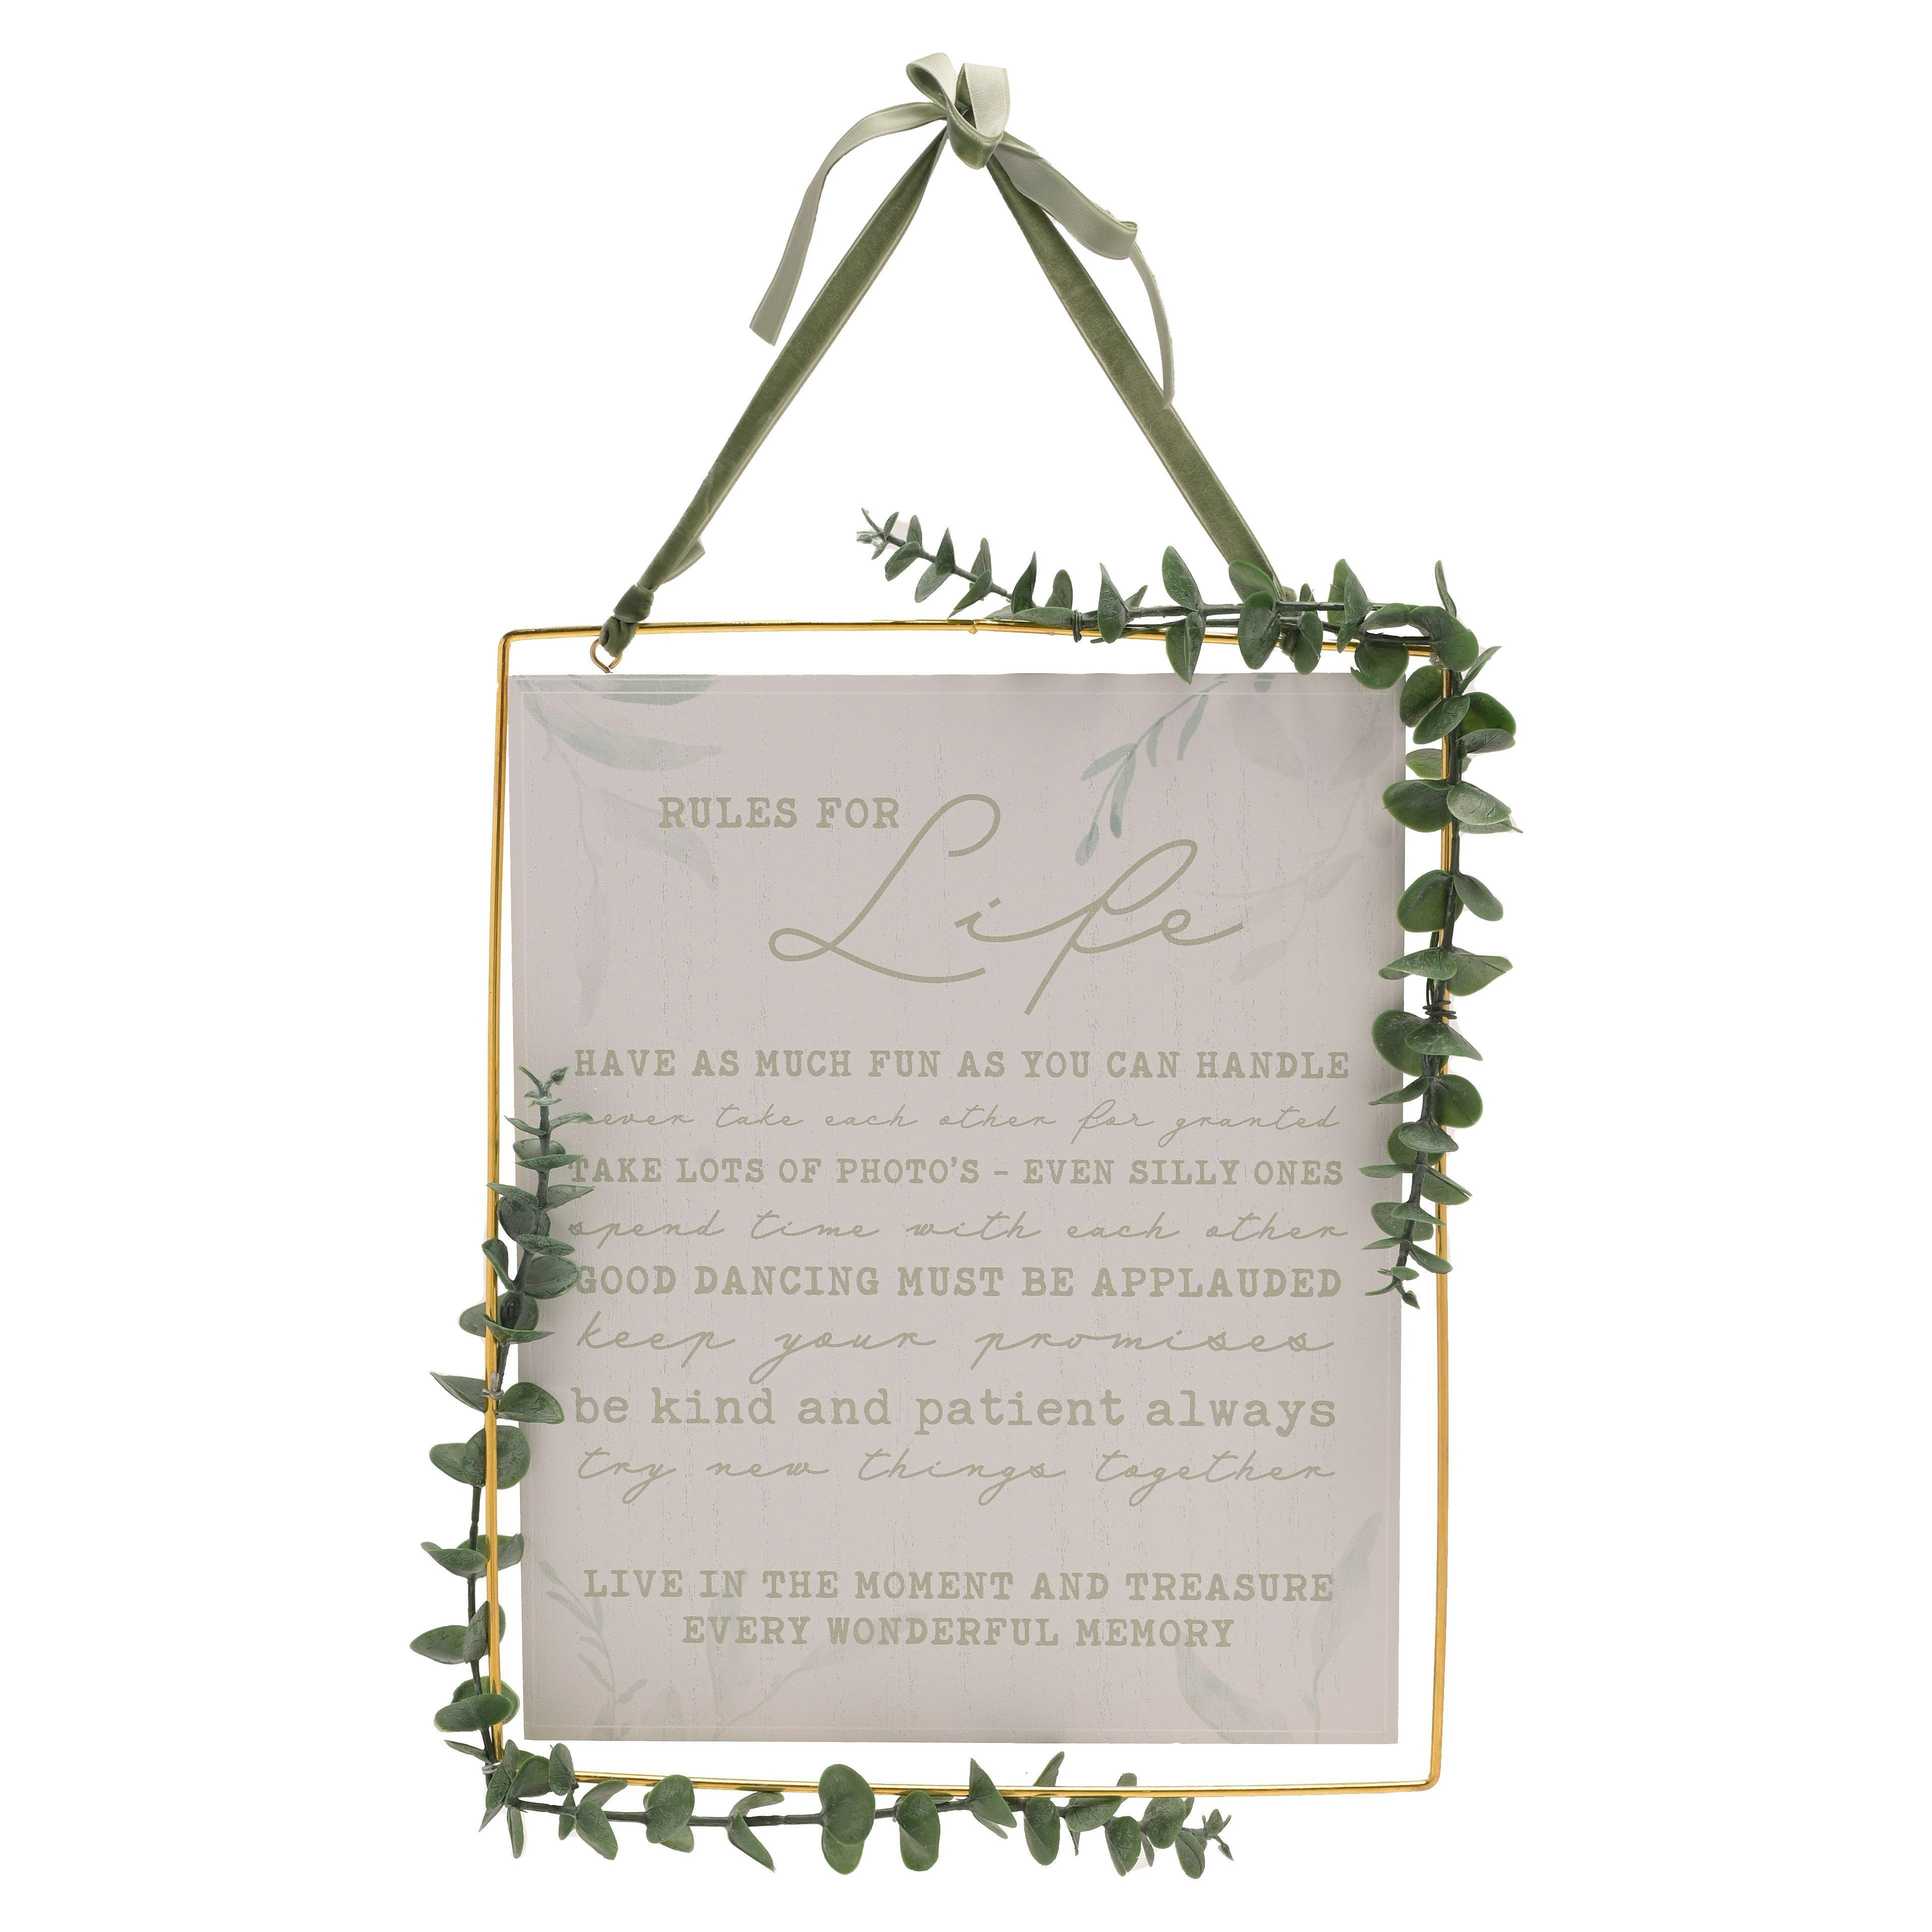 Love Story 'Rules For Life' Plaque - image 1